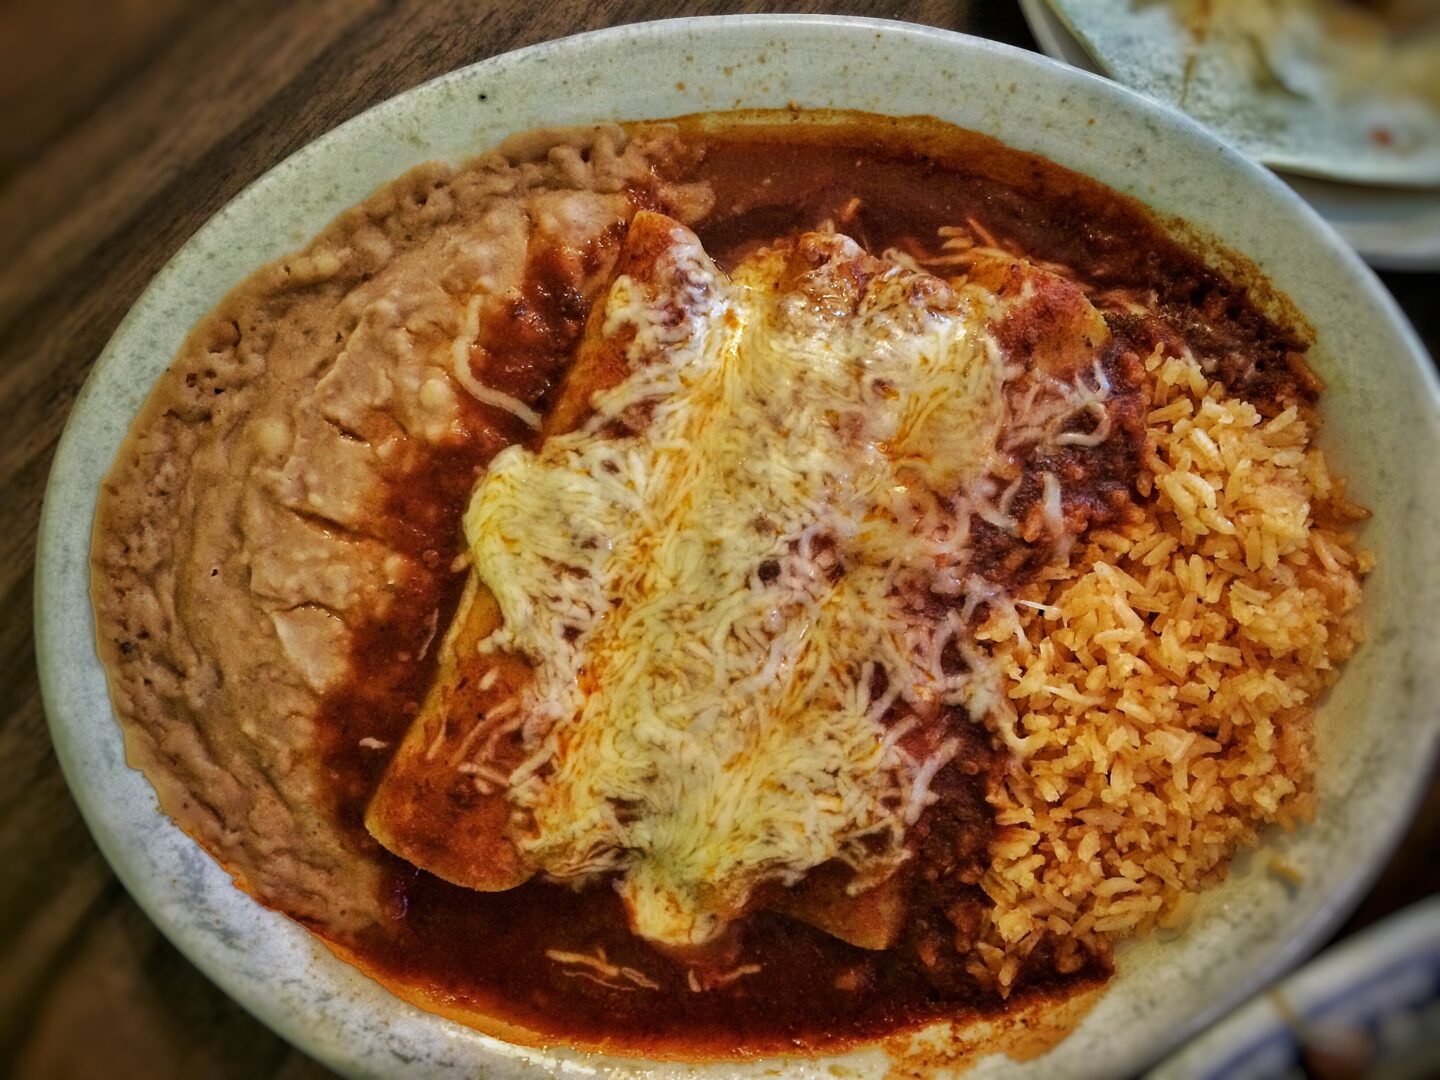 A plate of mexican food with rice and enchiladas.